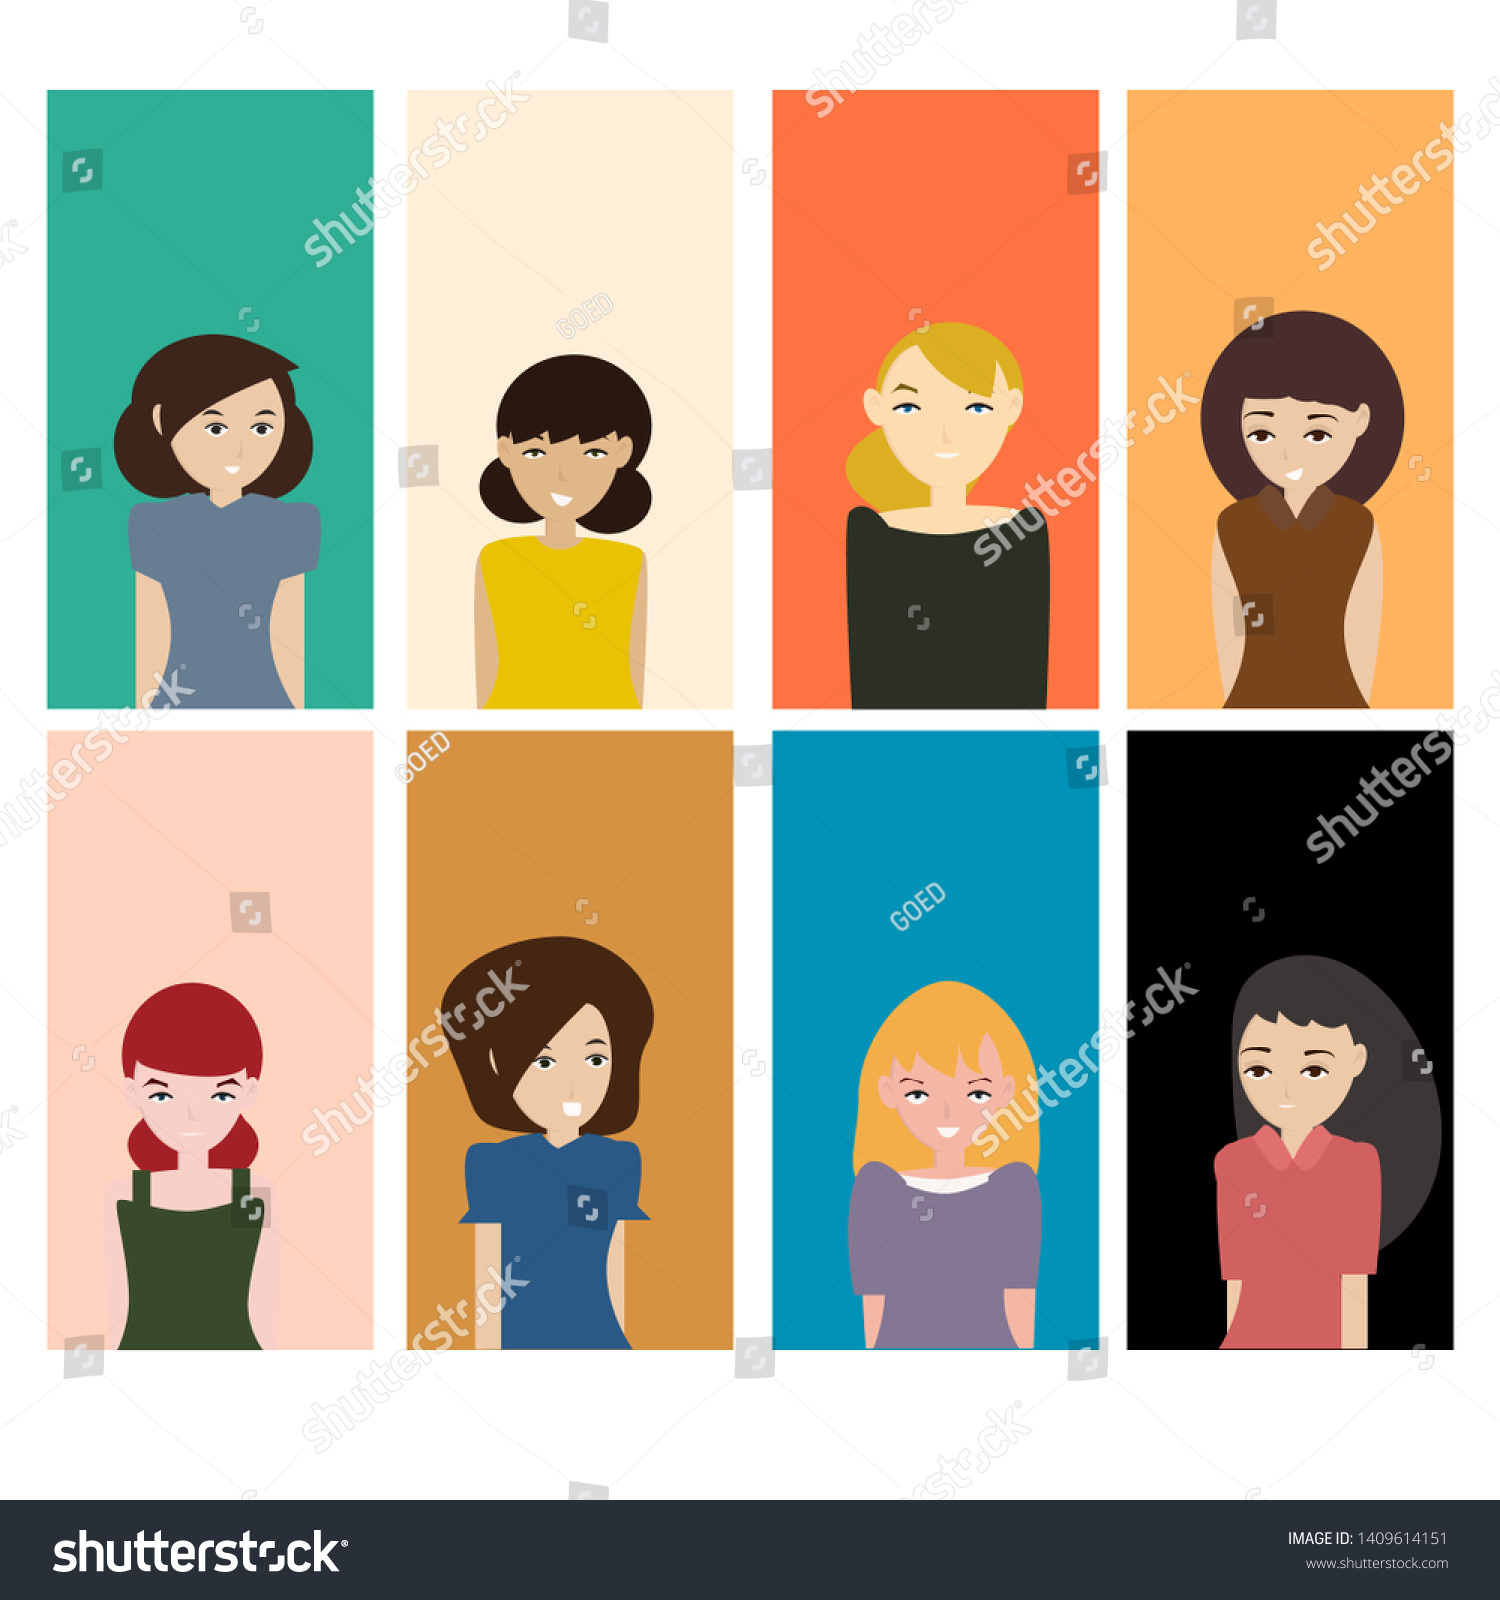 Set Cute Girls Different Hairstyles Color Stock Vector Royalty Free 1409614151 Shutterstock 